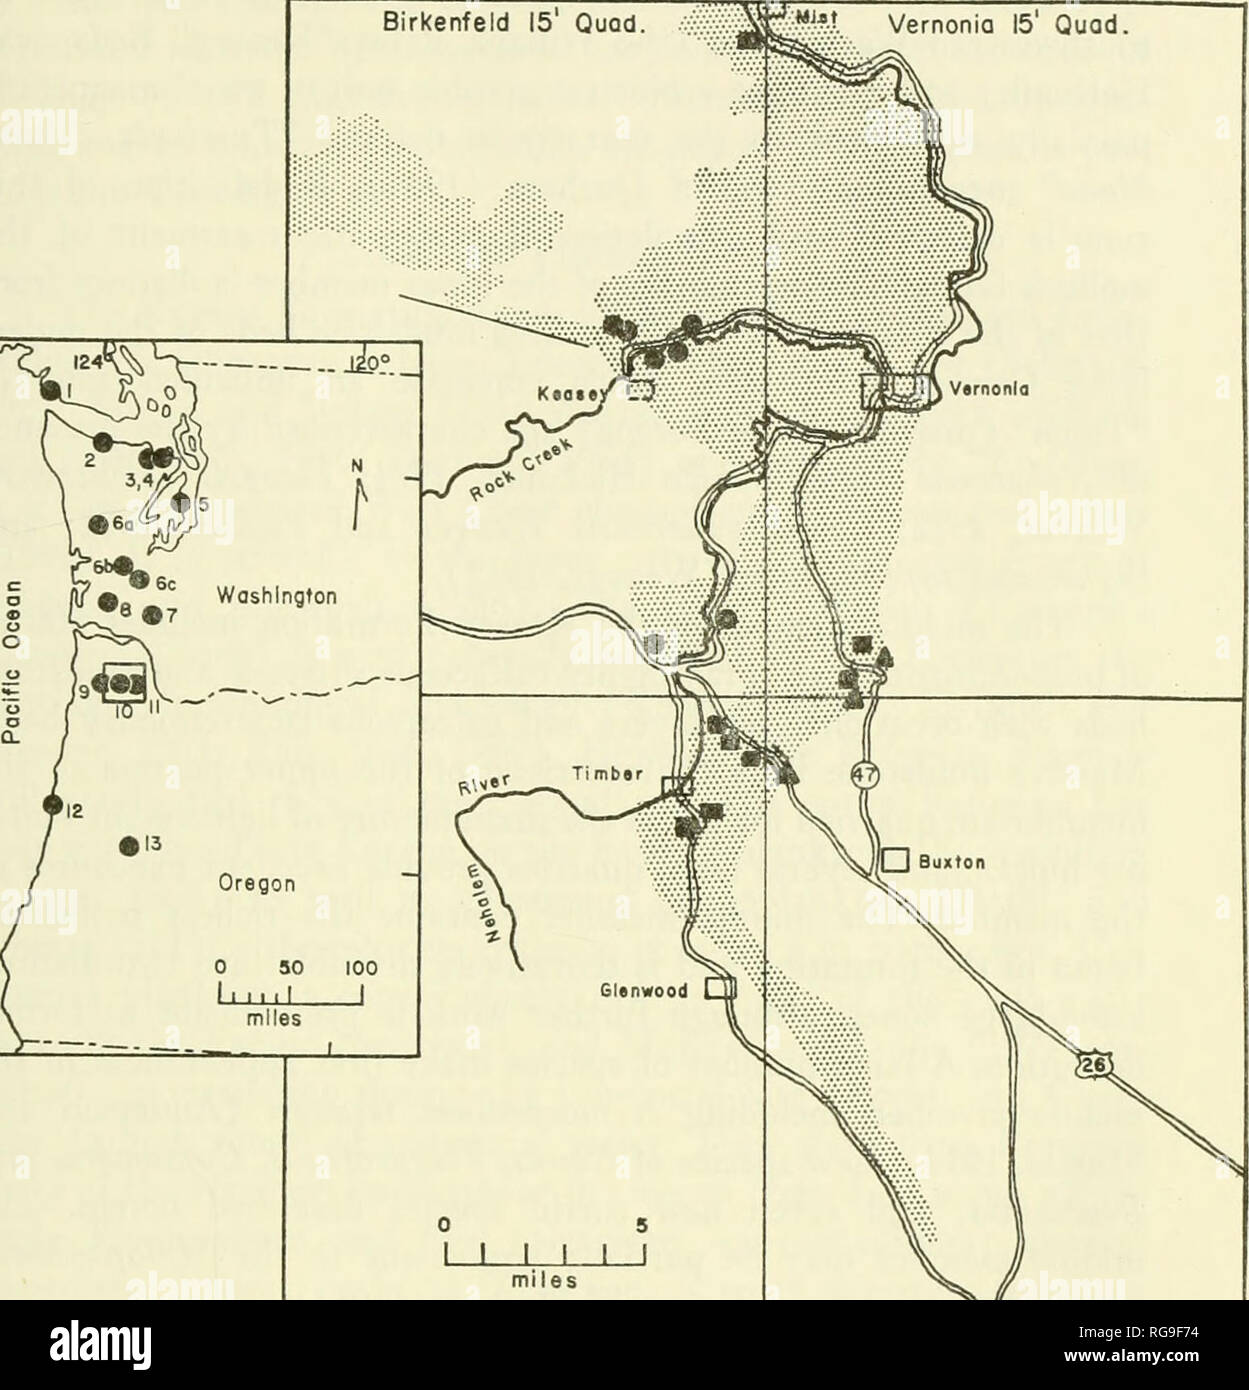 . Bulletins of American paleontology. Oregon Oligocene Turridae: Hickman -48&quot; ^â¦â^ JC Birkenfeld Vernonia 15' Quad.. Timber 15' Quad. I J R)rÂ«st Grove Forest Grove 15' Quad. Text-figure 1. â Index maps. Location of formations in the Pacific North- west referred to in text and generalized distribution of the Keasey Formation in the upper Nehalem River basin in Oregon, showing important fossiliferous outcrops in the lower (â¢), middle (â ), and upper (â ^) members. 1. Carmanah Point Beds, 2. Twin River Formation, 3. Marrowstone Shale, 4. Quimper Sand- stone, 5. Blakeley Formation, 6. Linc Stock Photo